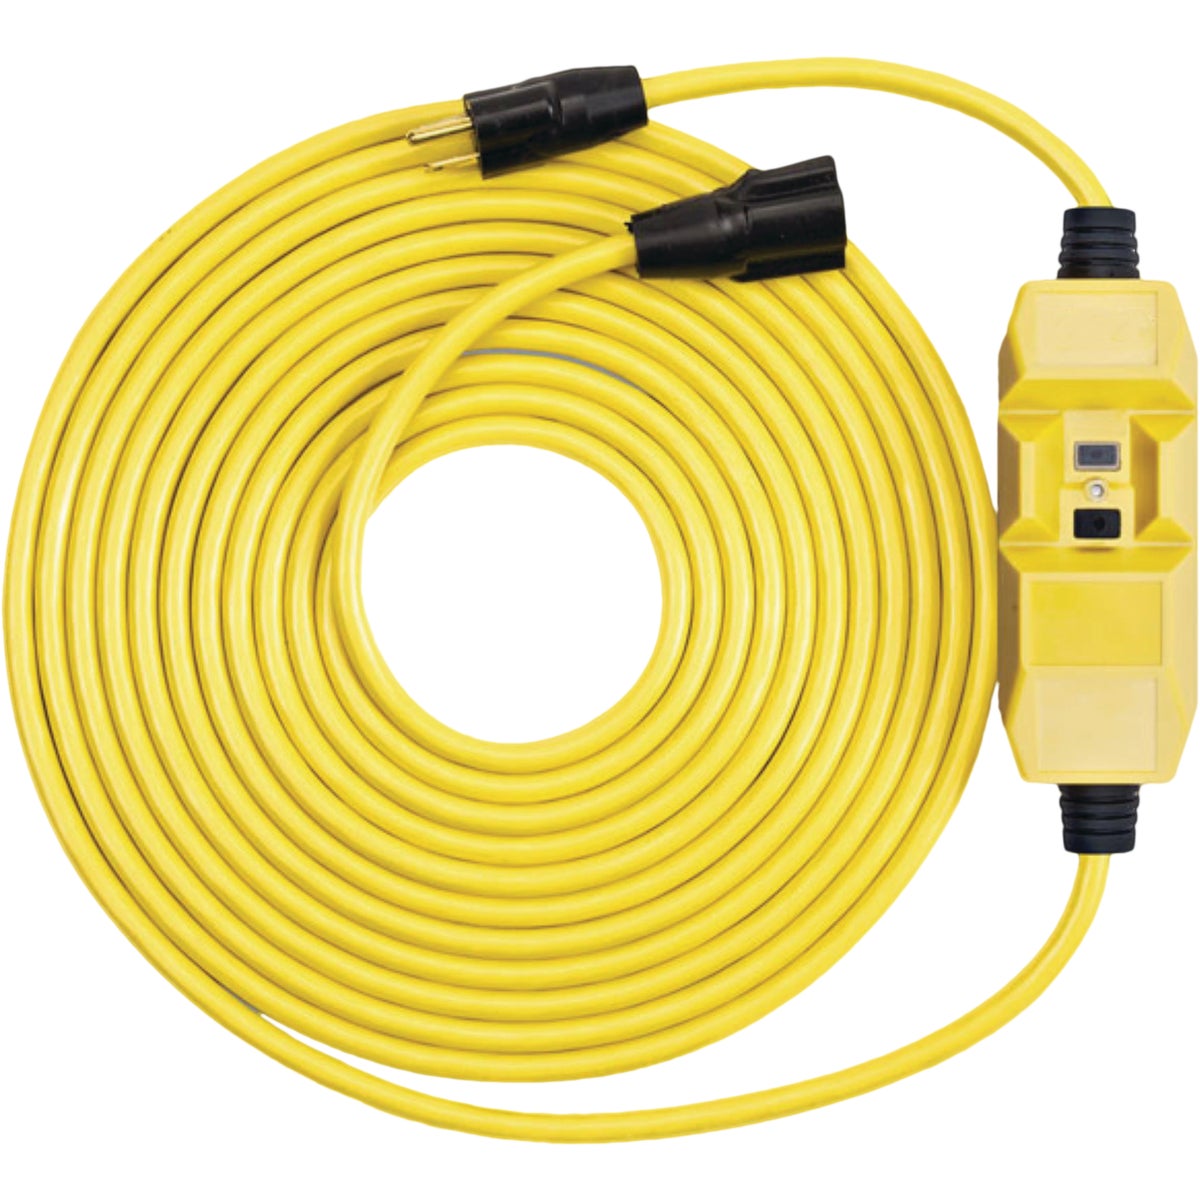 Southwire 25 Ft. 14/3 Heavy-Duty GFCI In-Line Extension Cord